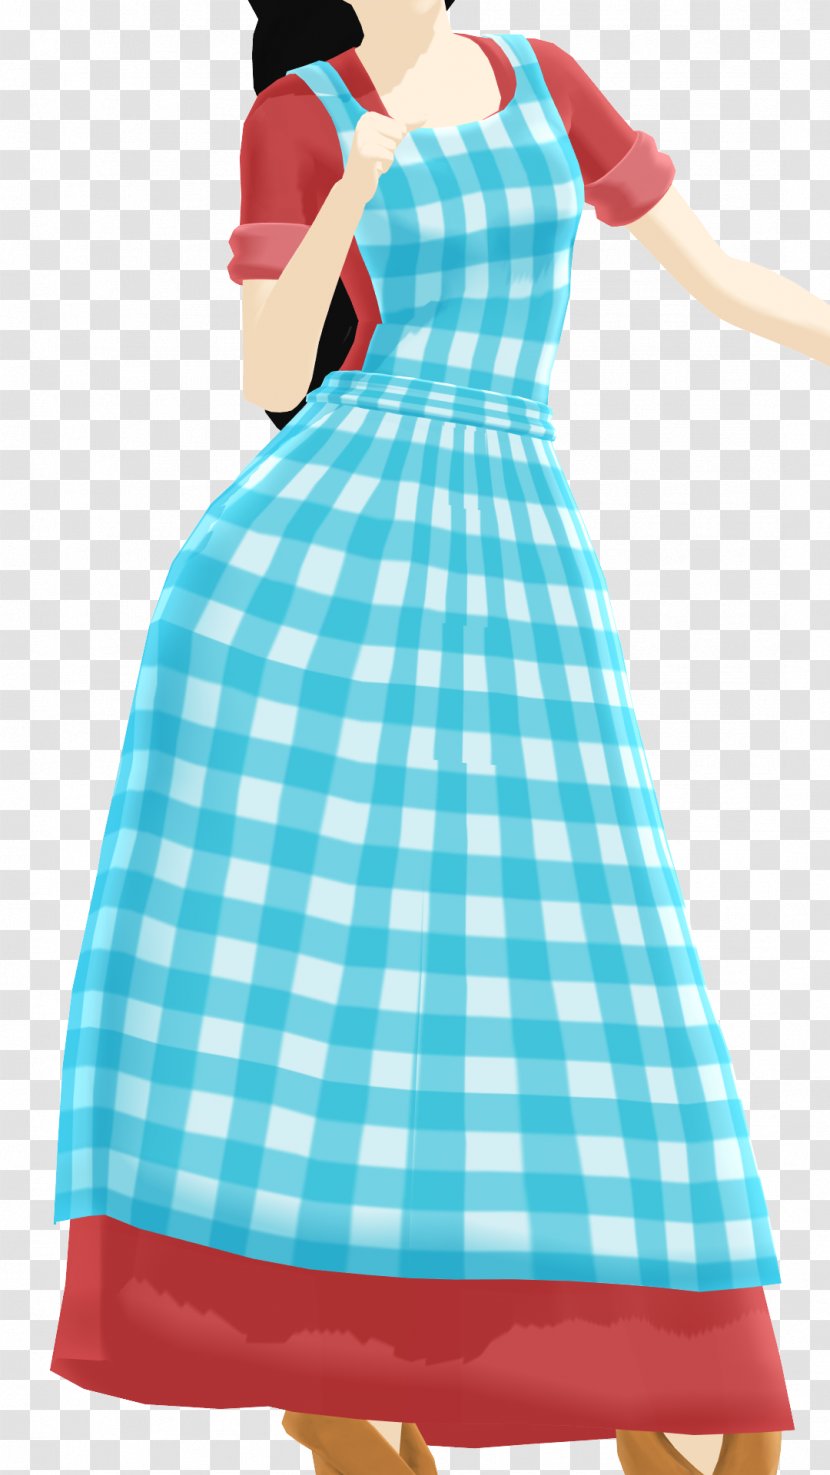 Dress Gown Clothing Skirt Apron Transparent PNG